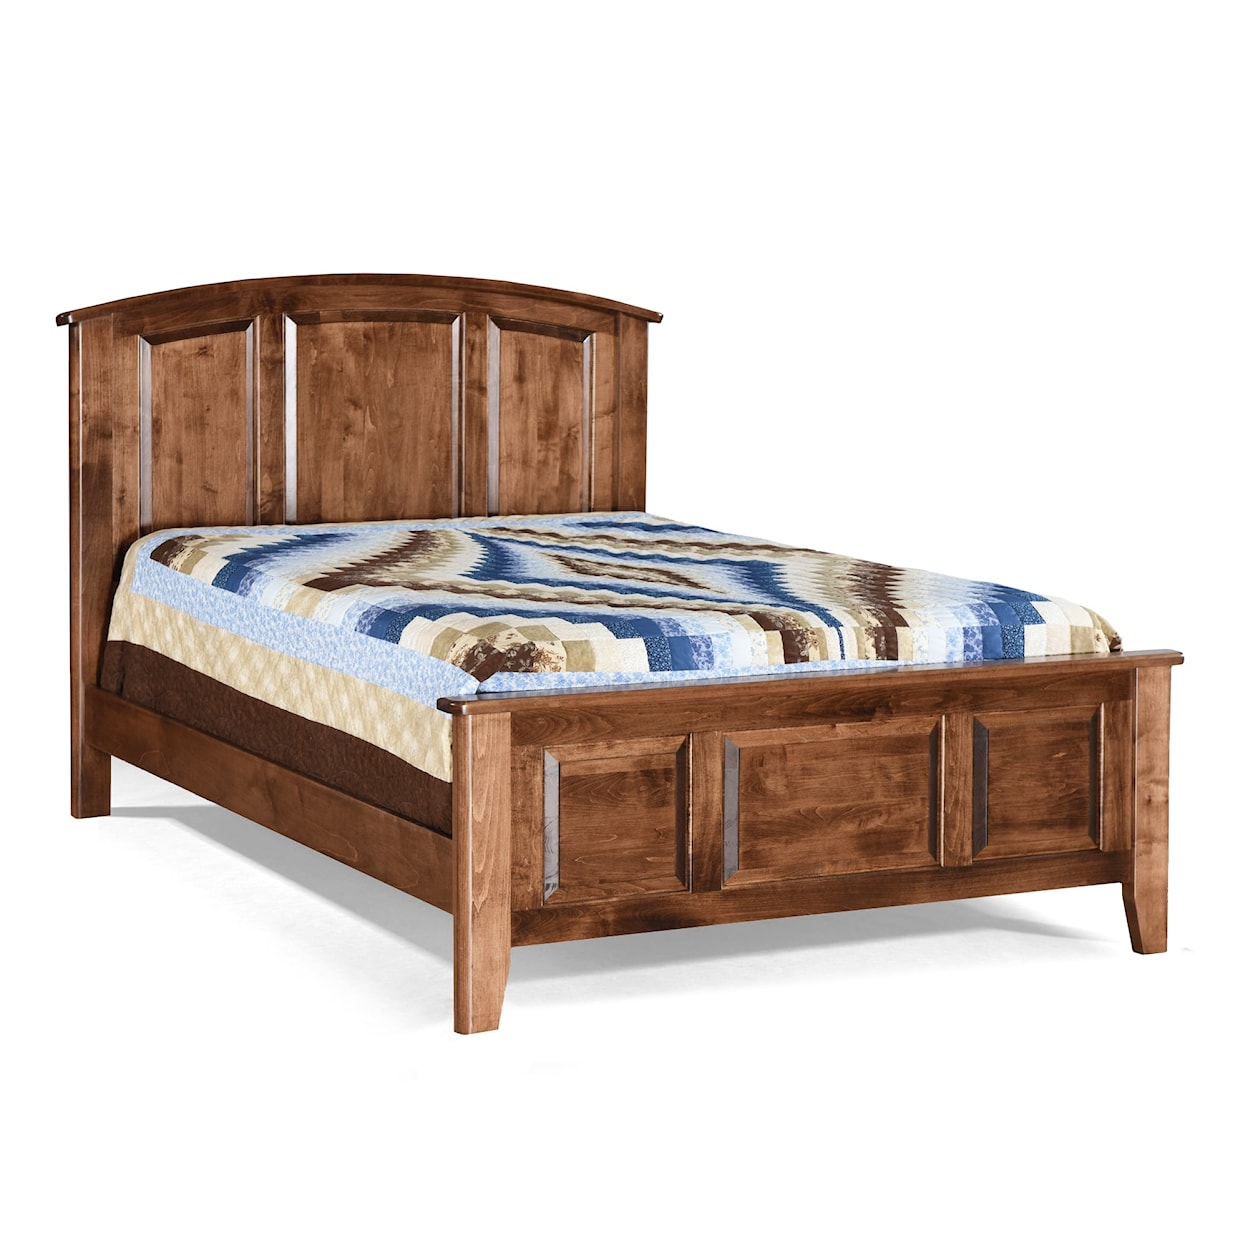 Archbold Furniture Carson Queen Arched Panel Bed